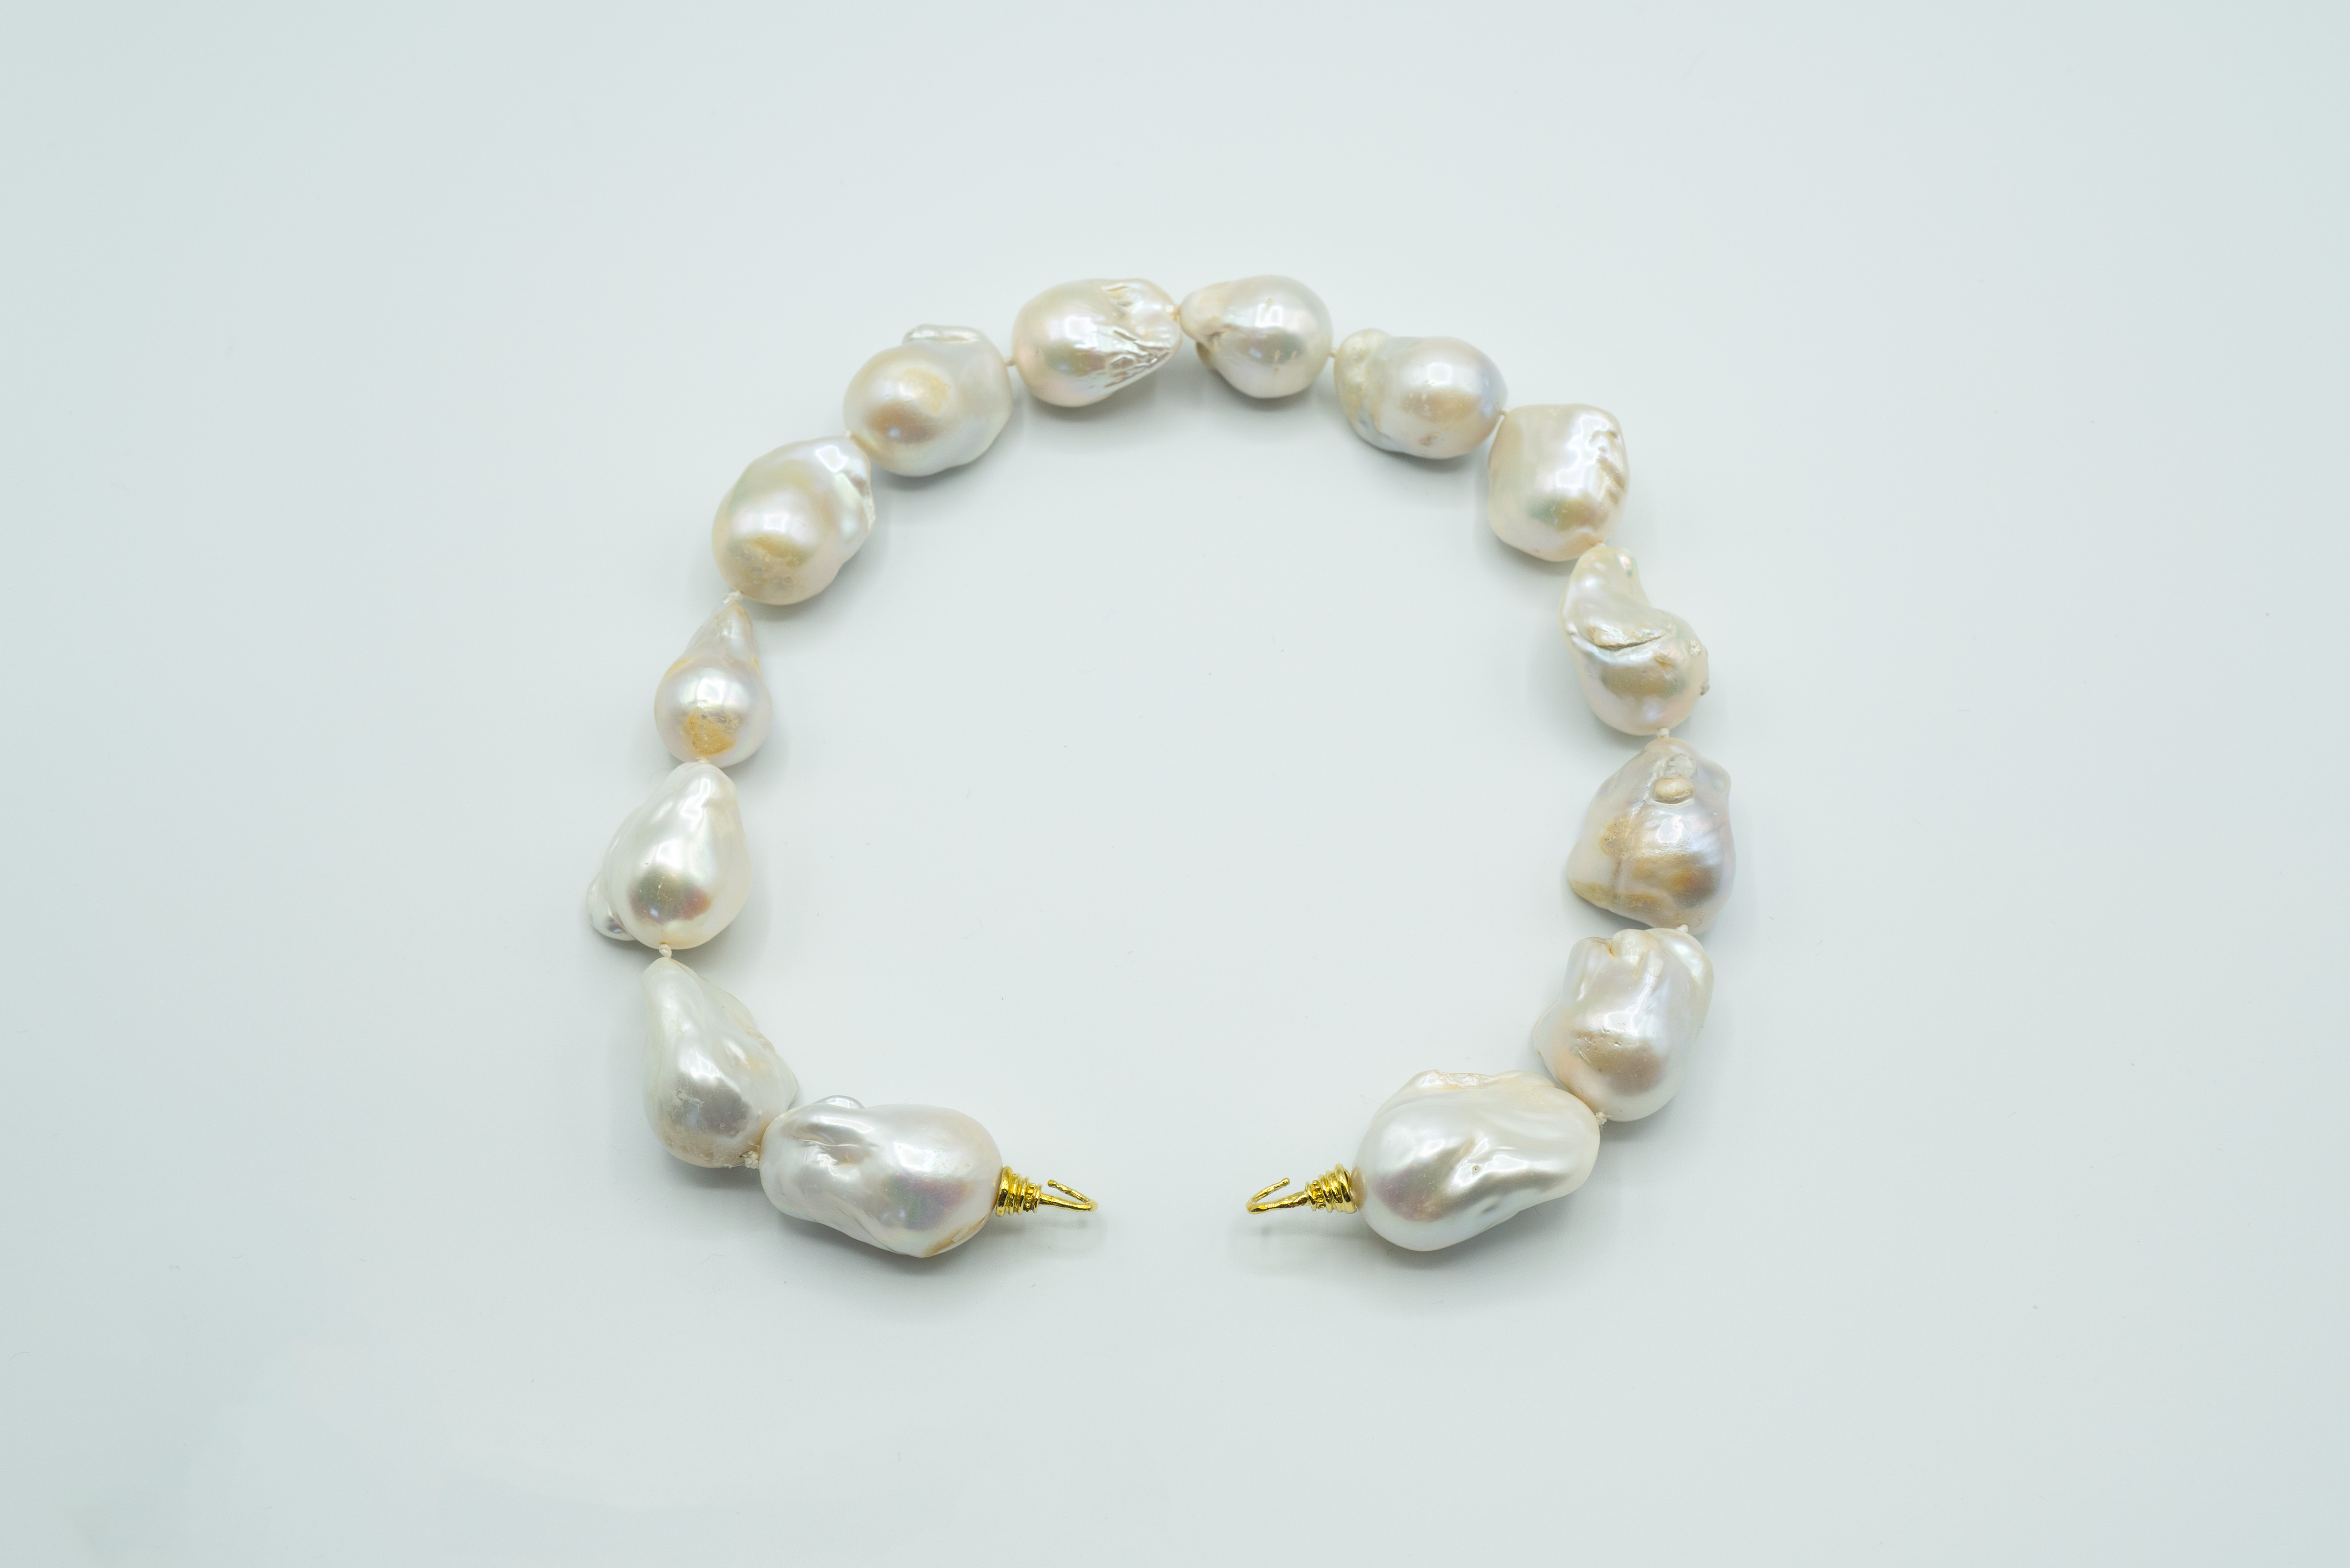 Giant Freshwater Baroque Pearls on Brass Hand Cast Hooks, Knotted Individually on Silk